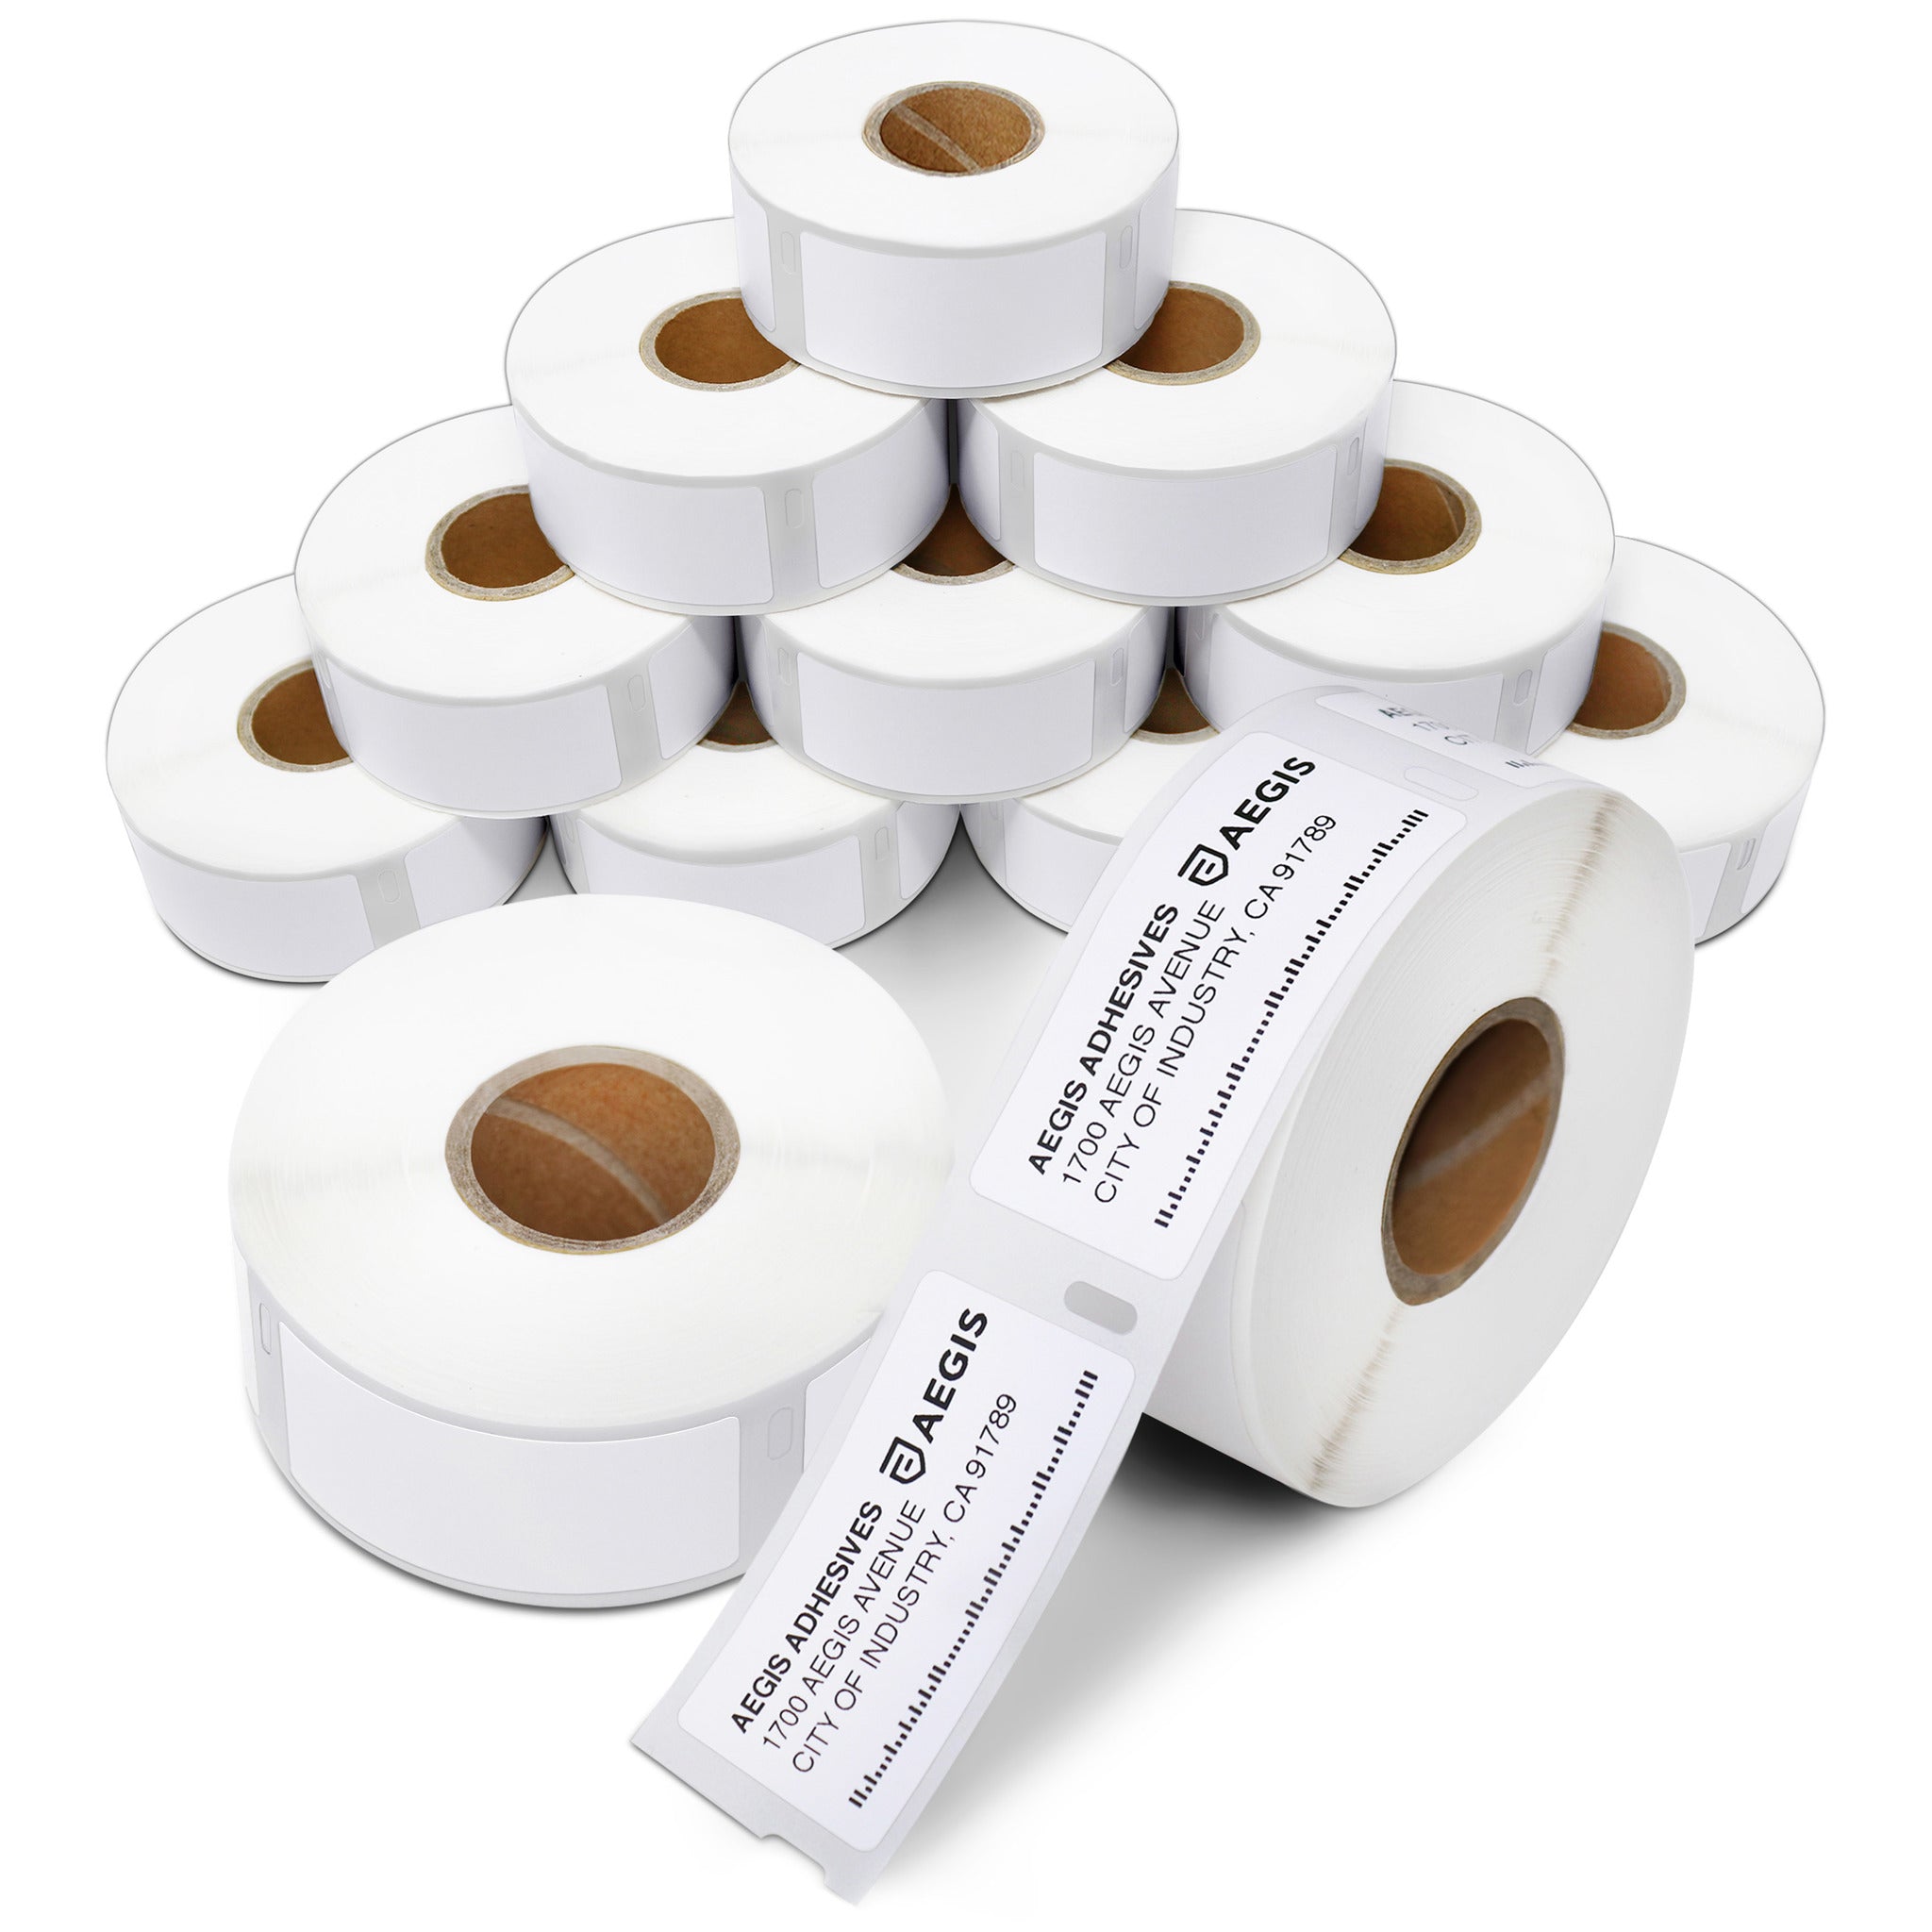  HOUSELABELS Compatible DYMO 30336 Multipurpose Labels (1 x  2-1/8) in Polypropylene Compatible with Rollo, Some DYMO LW Printers, 24  Rolls / 500 Labels per Roll